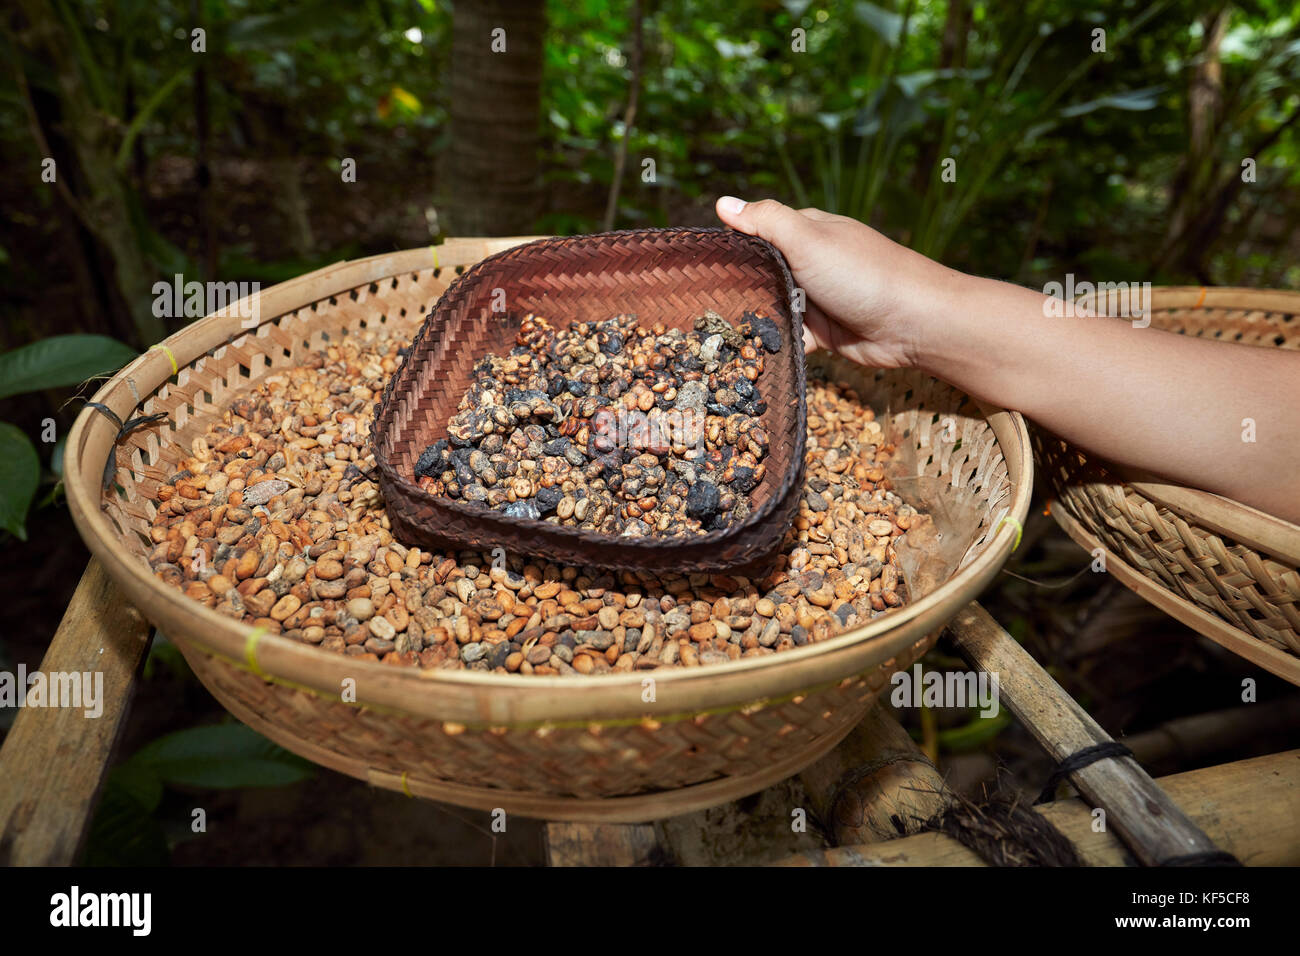 Kopi luwak, or civet coffee - includes part-digested coffee cherries eaten and defecated by the Asian palm civet. Ubud, Bali, Indonesia. Stock Photo